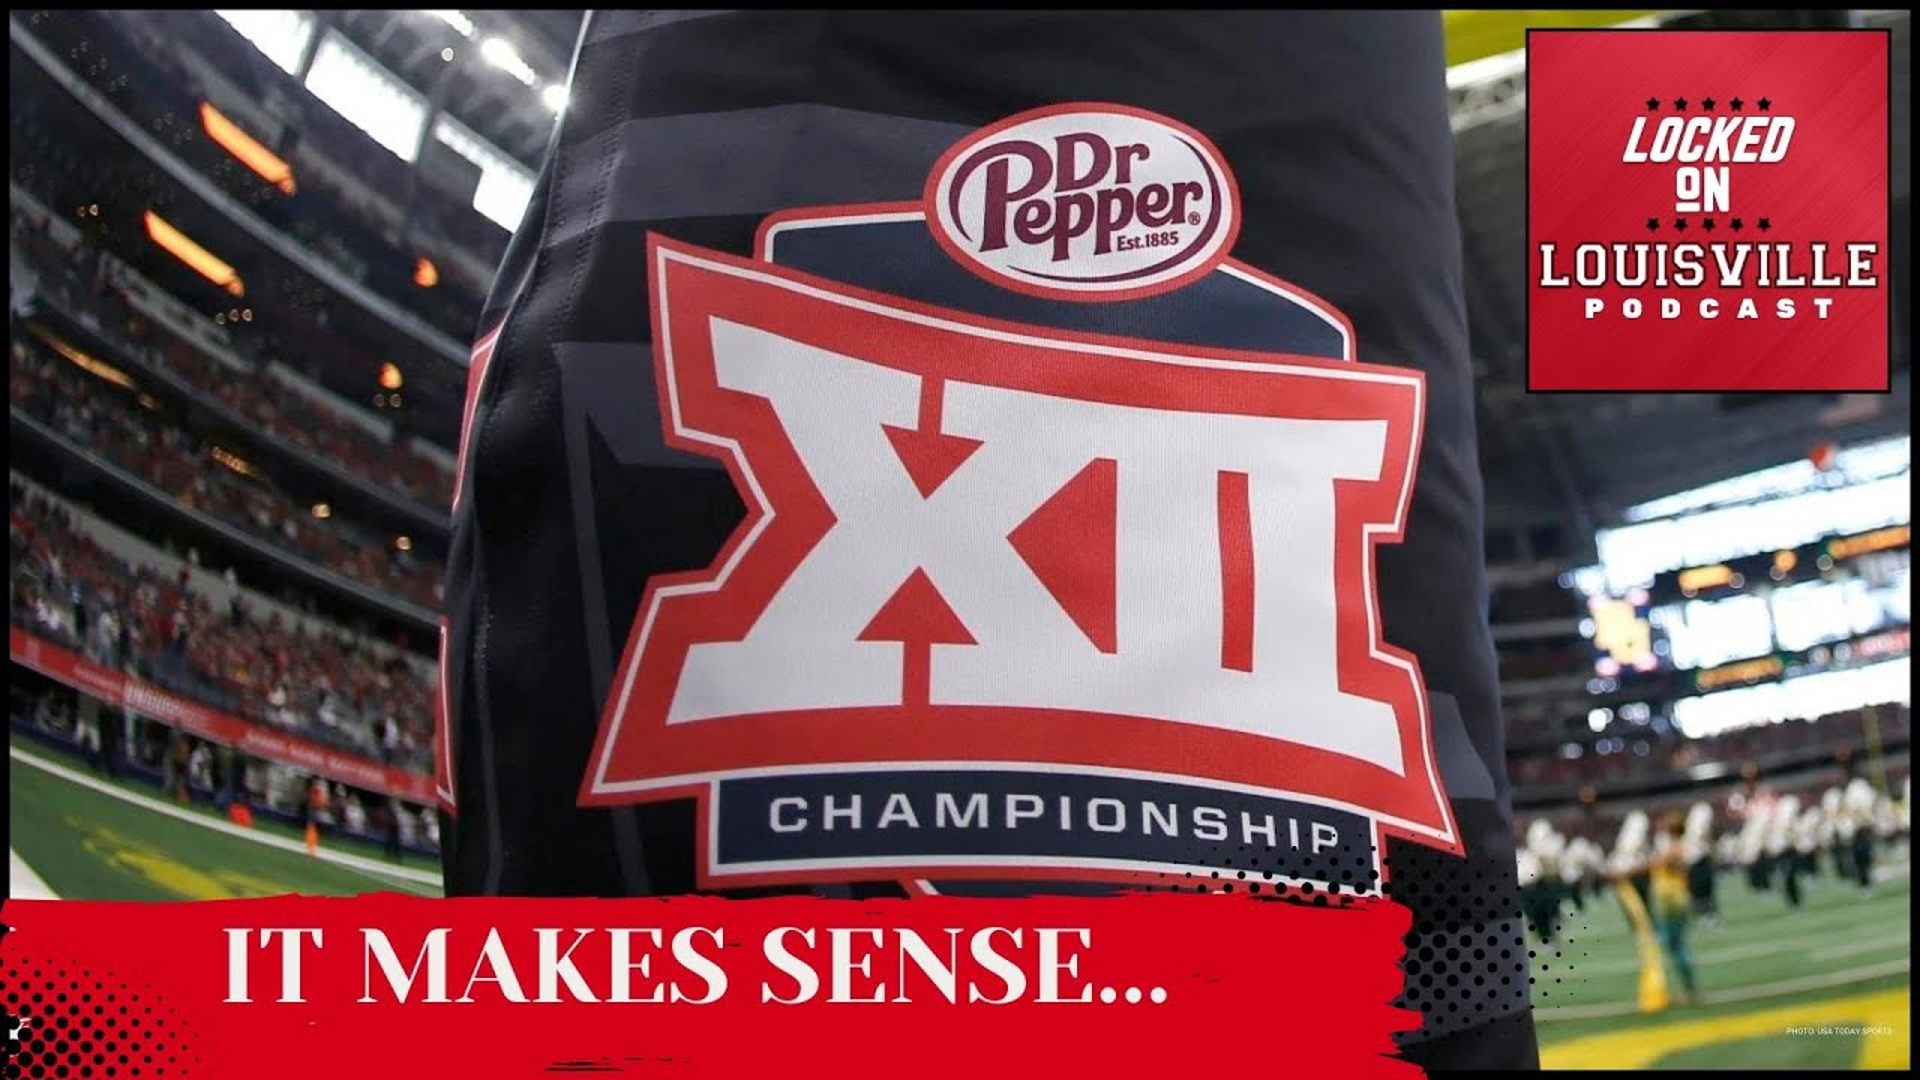 Going to the Big 12 would make sense for both the Louisville Cardinals and the conference